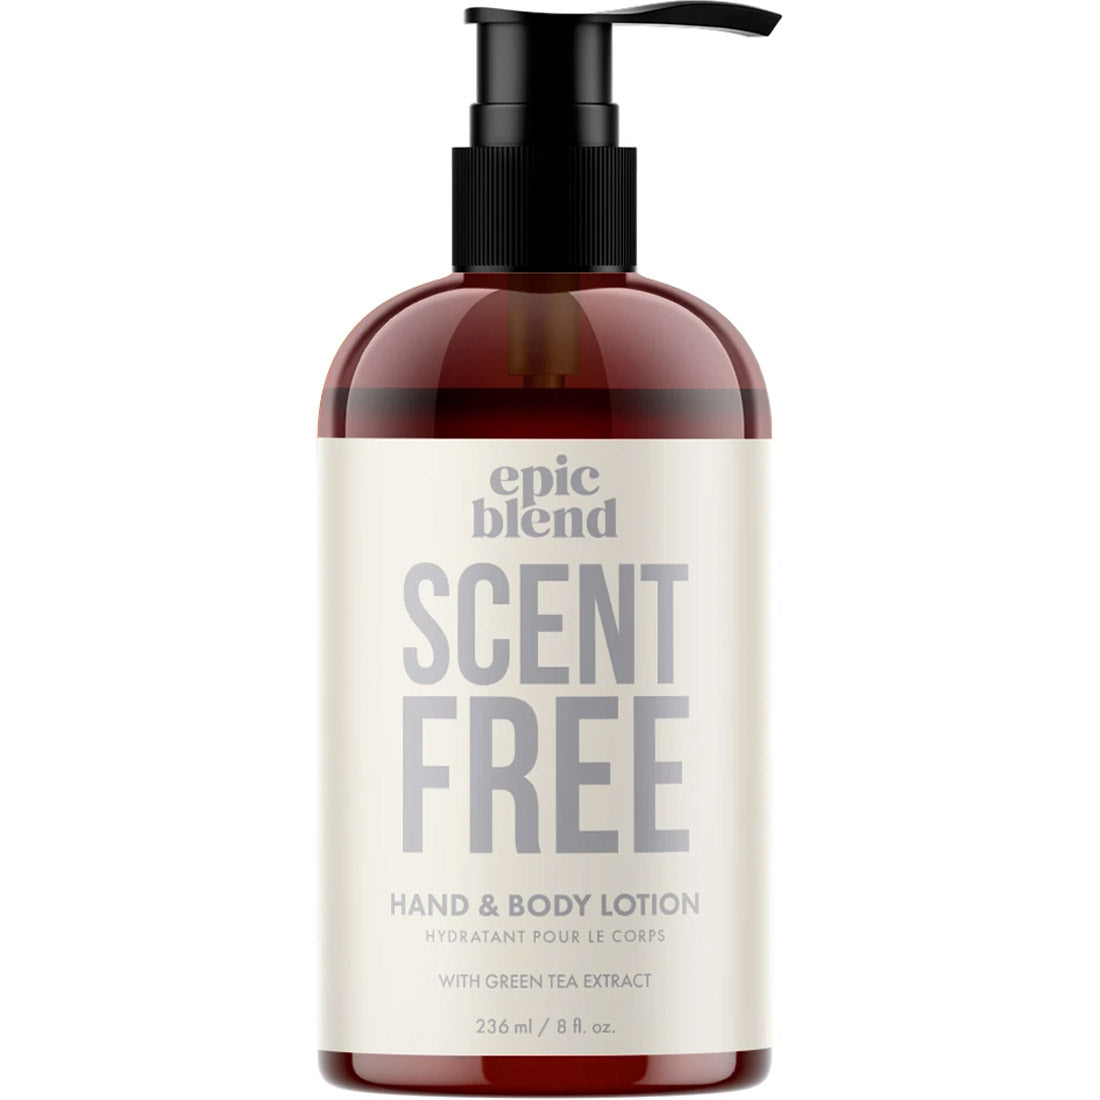 Epic Blend Hand & Body Lotion, 236 ml, Clearance 40% Off, Final Sale